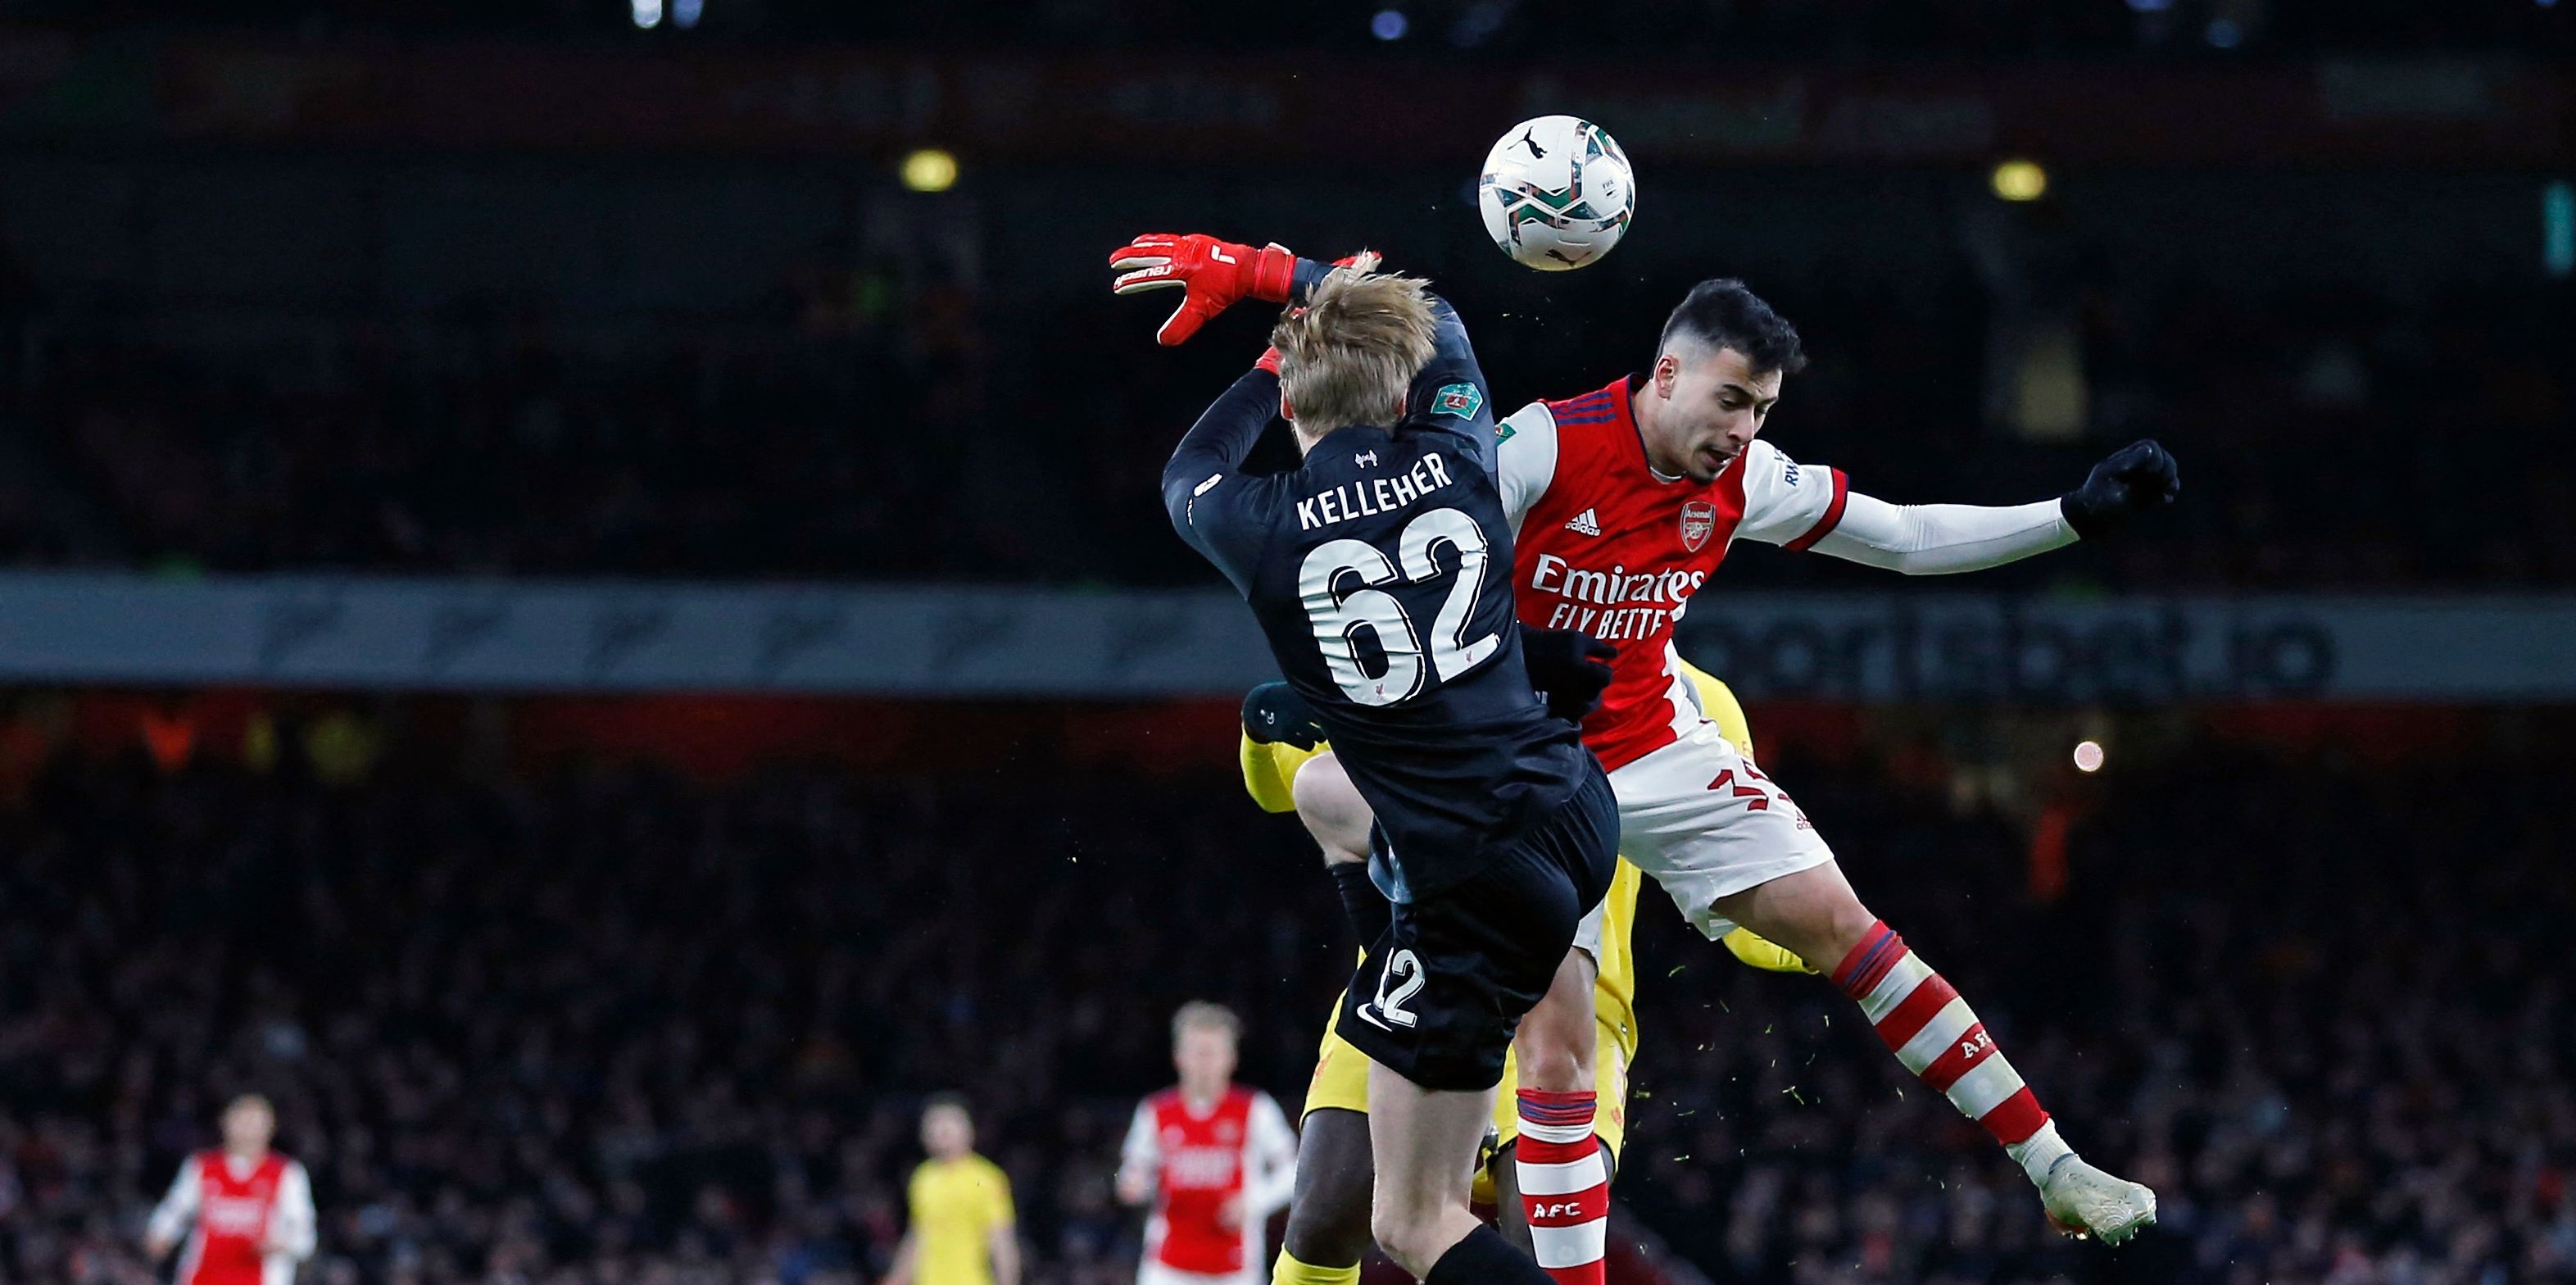 ‘Outstanding’ – Jurgen Klopp lauds one Arsenal star whose name ‘everyone should remember’ after Carabao Cup semi-final clash